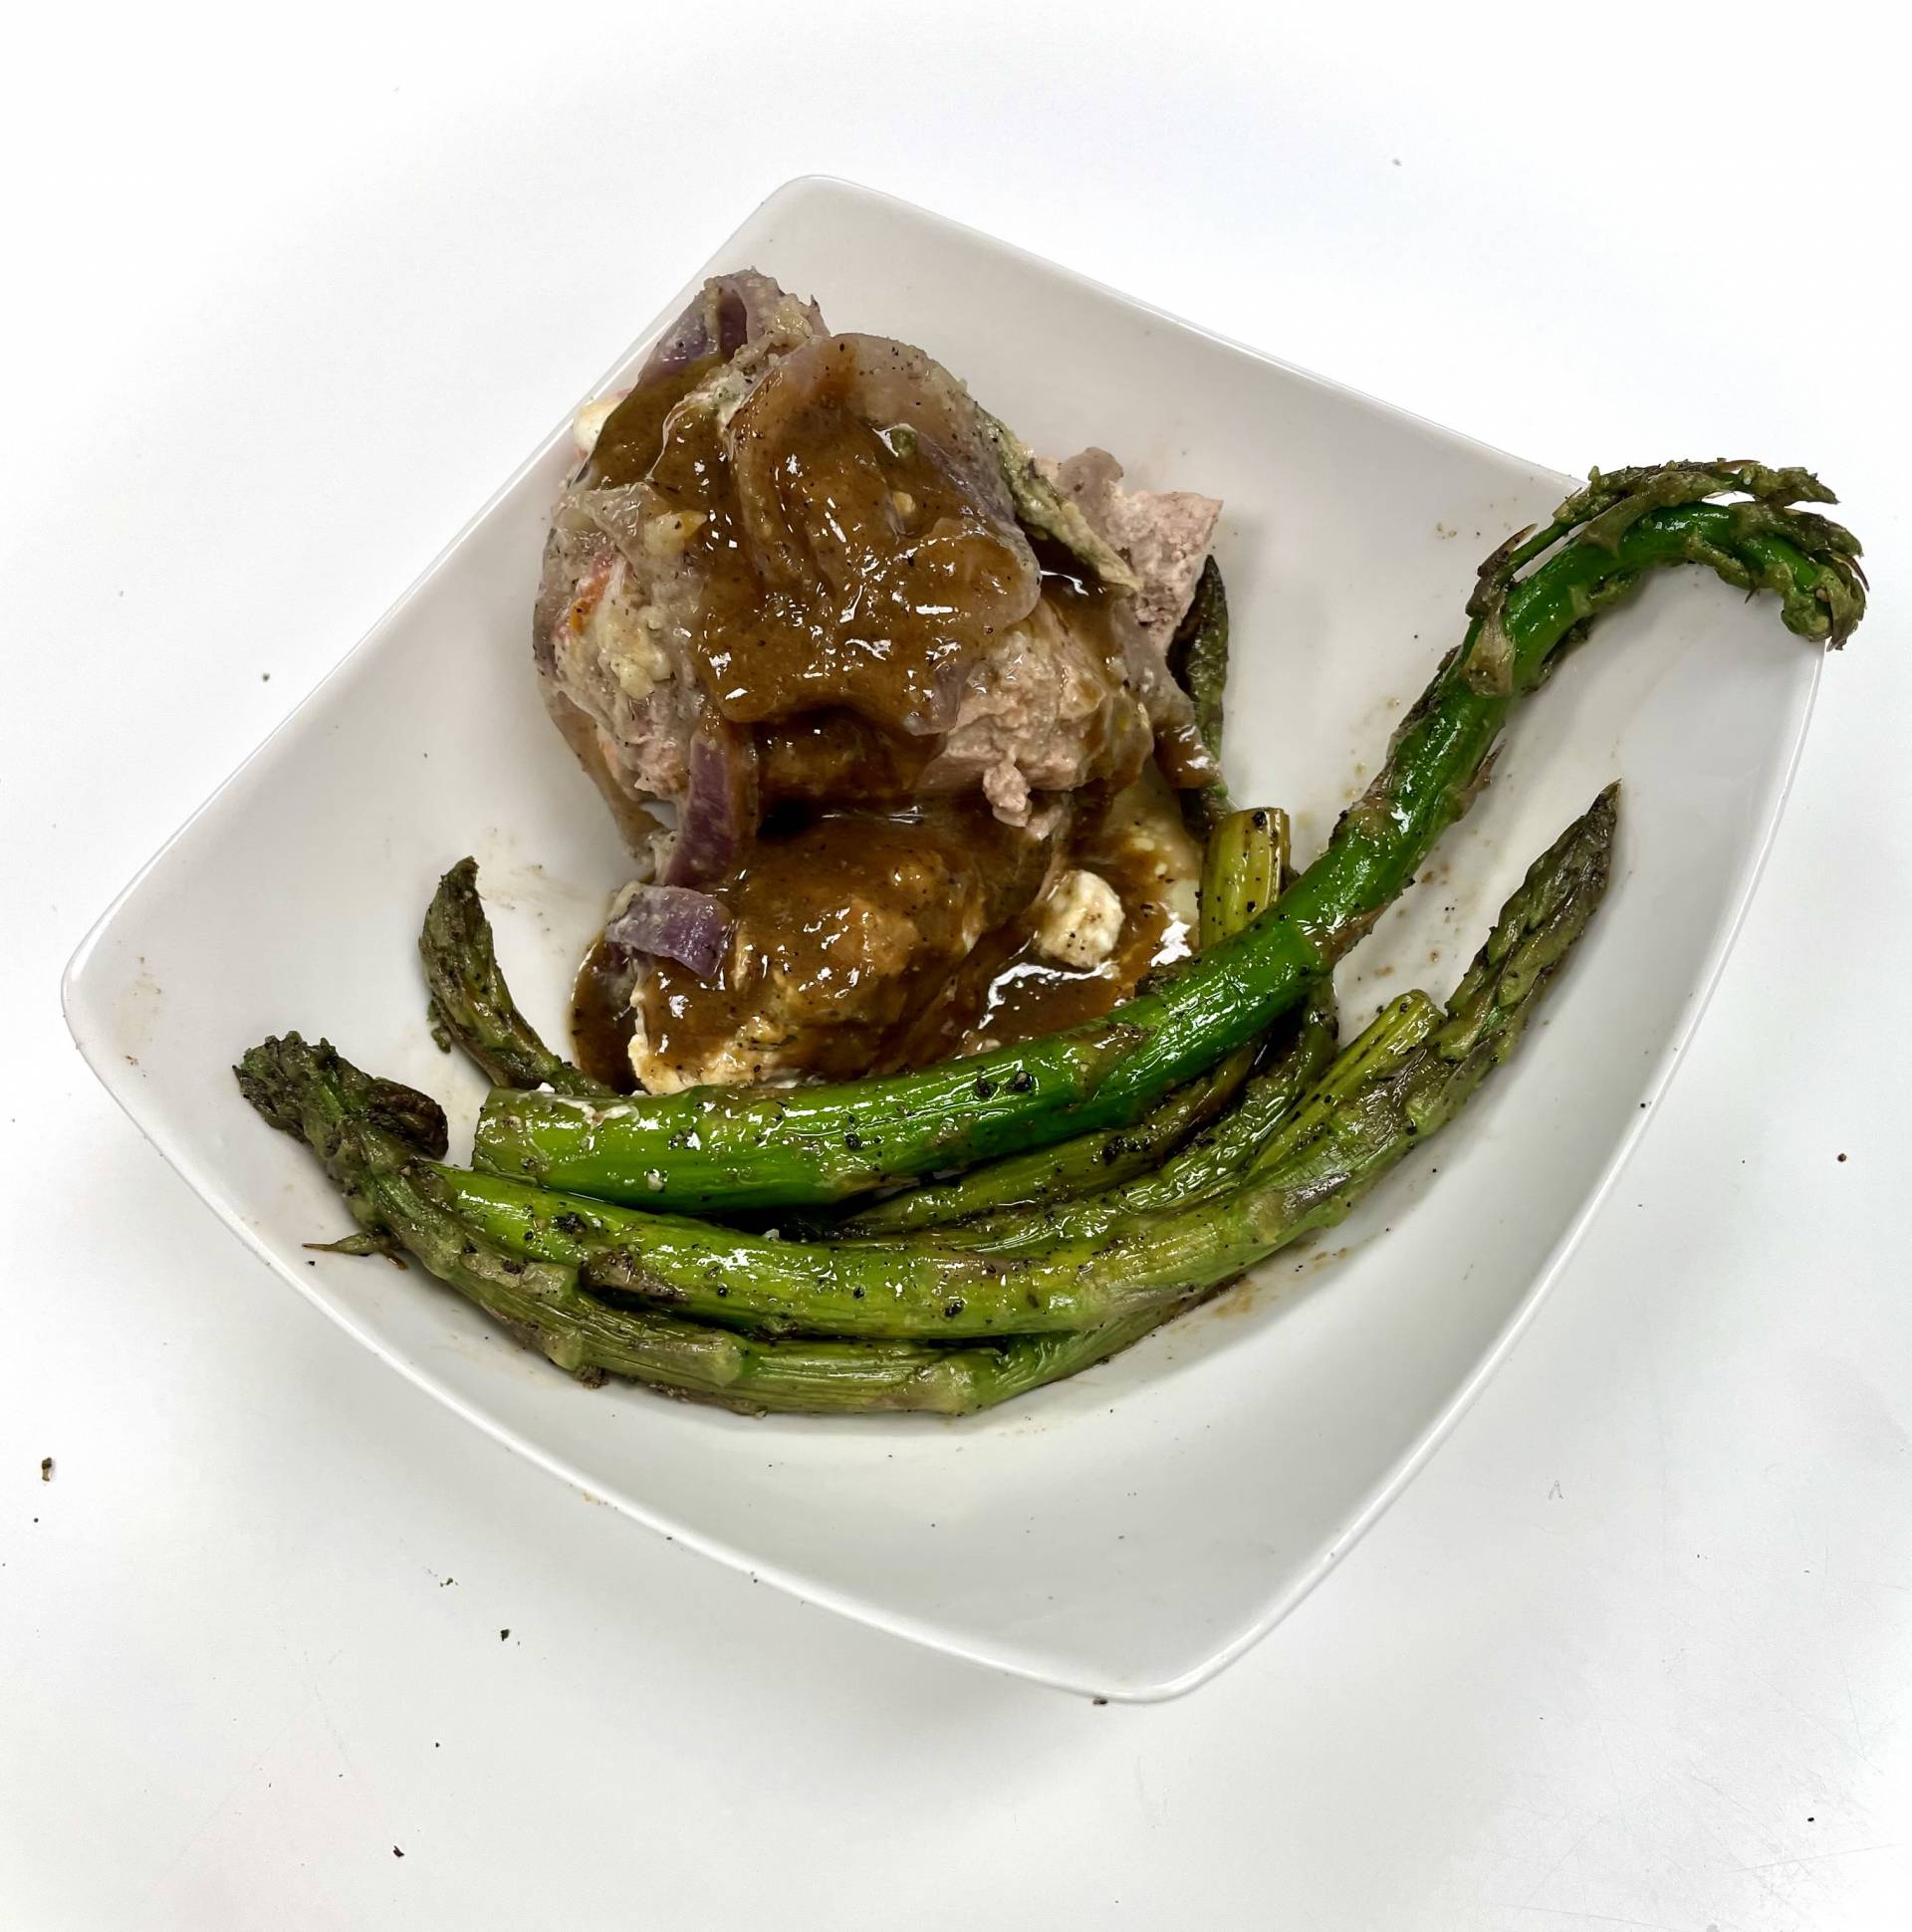 Stuffed Pork Loin with Caramelized Onions and Asparagus - Low Fat